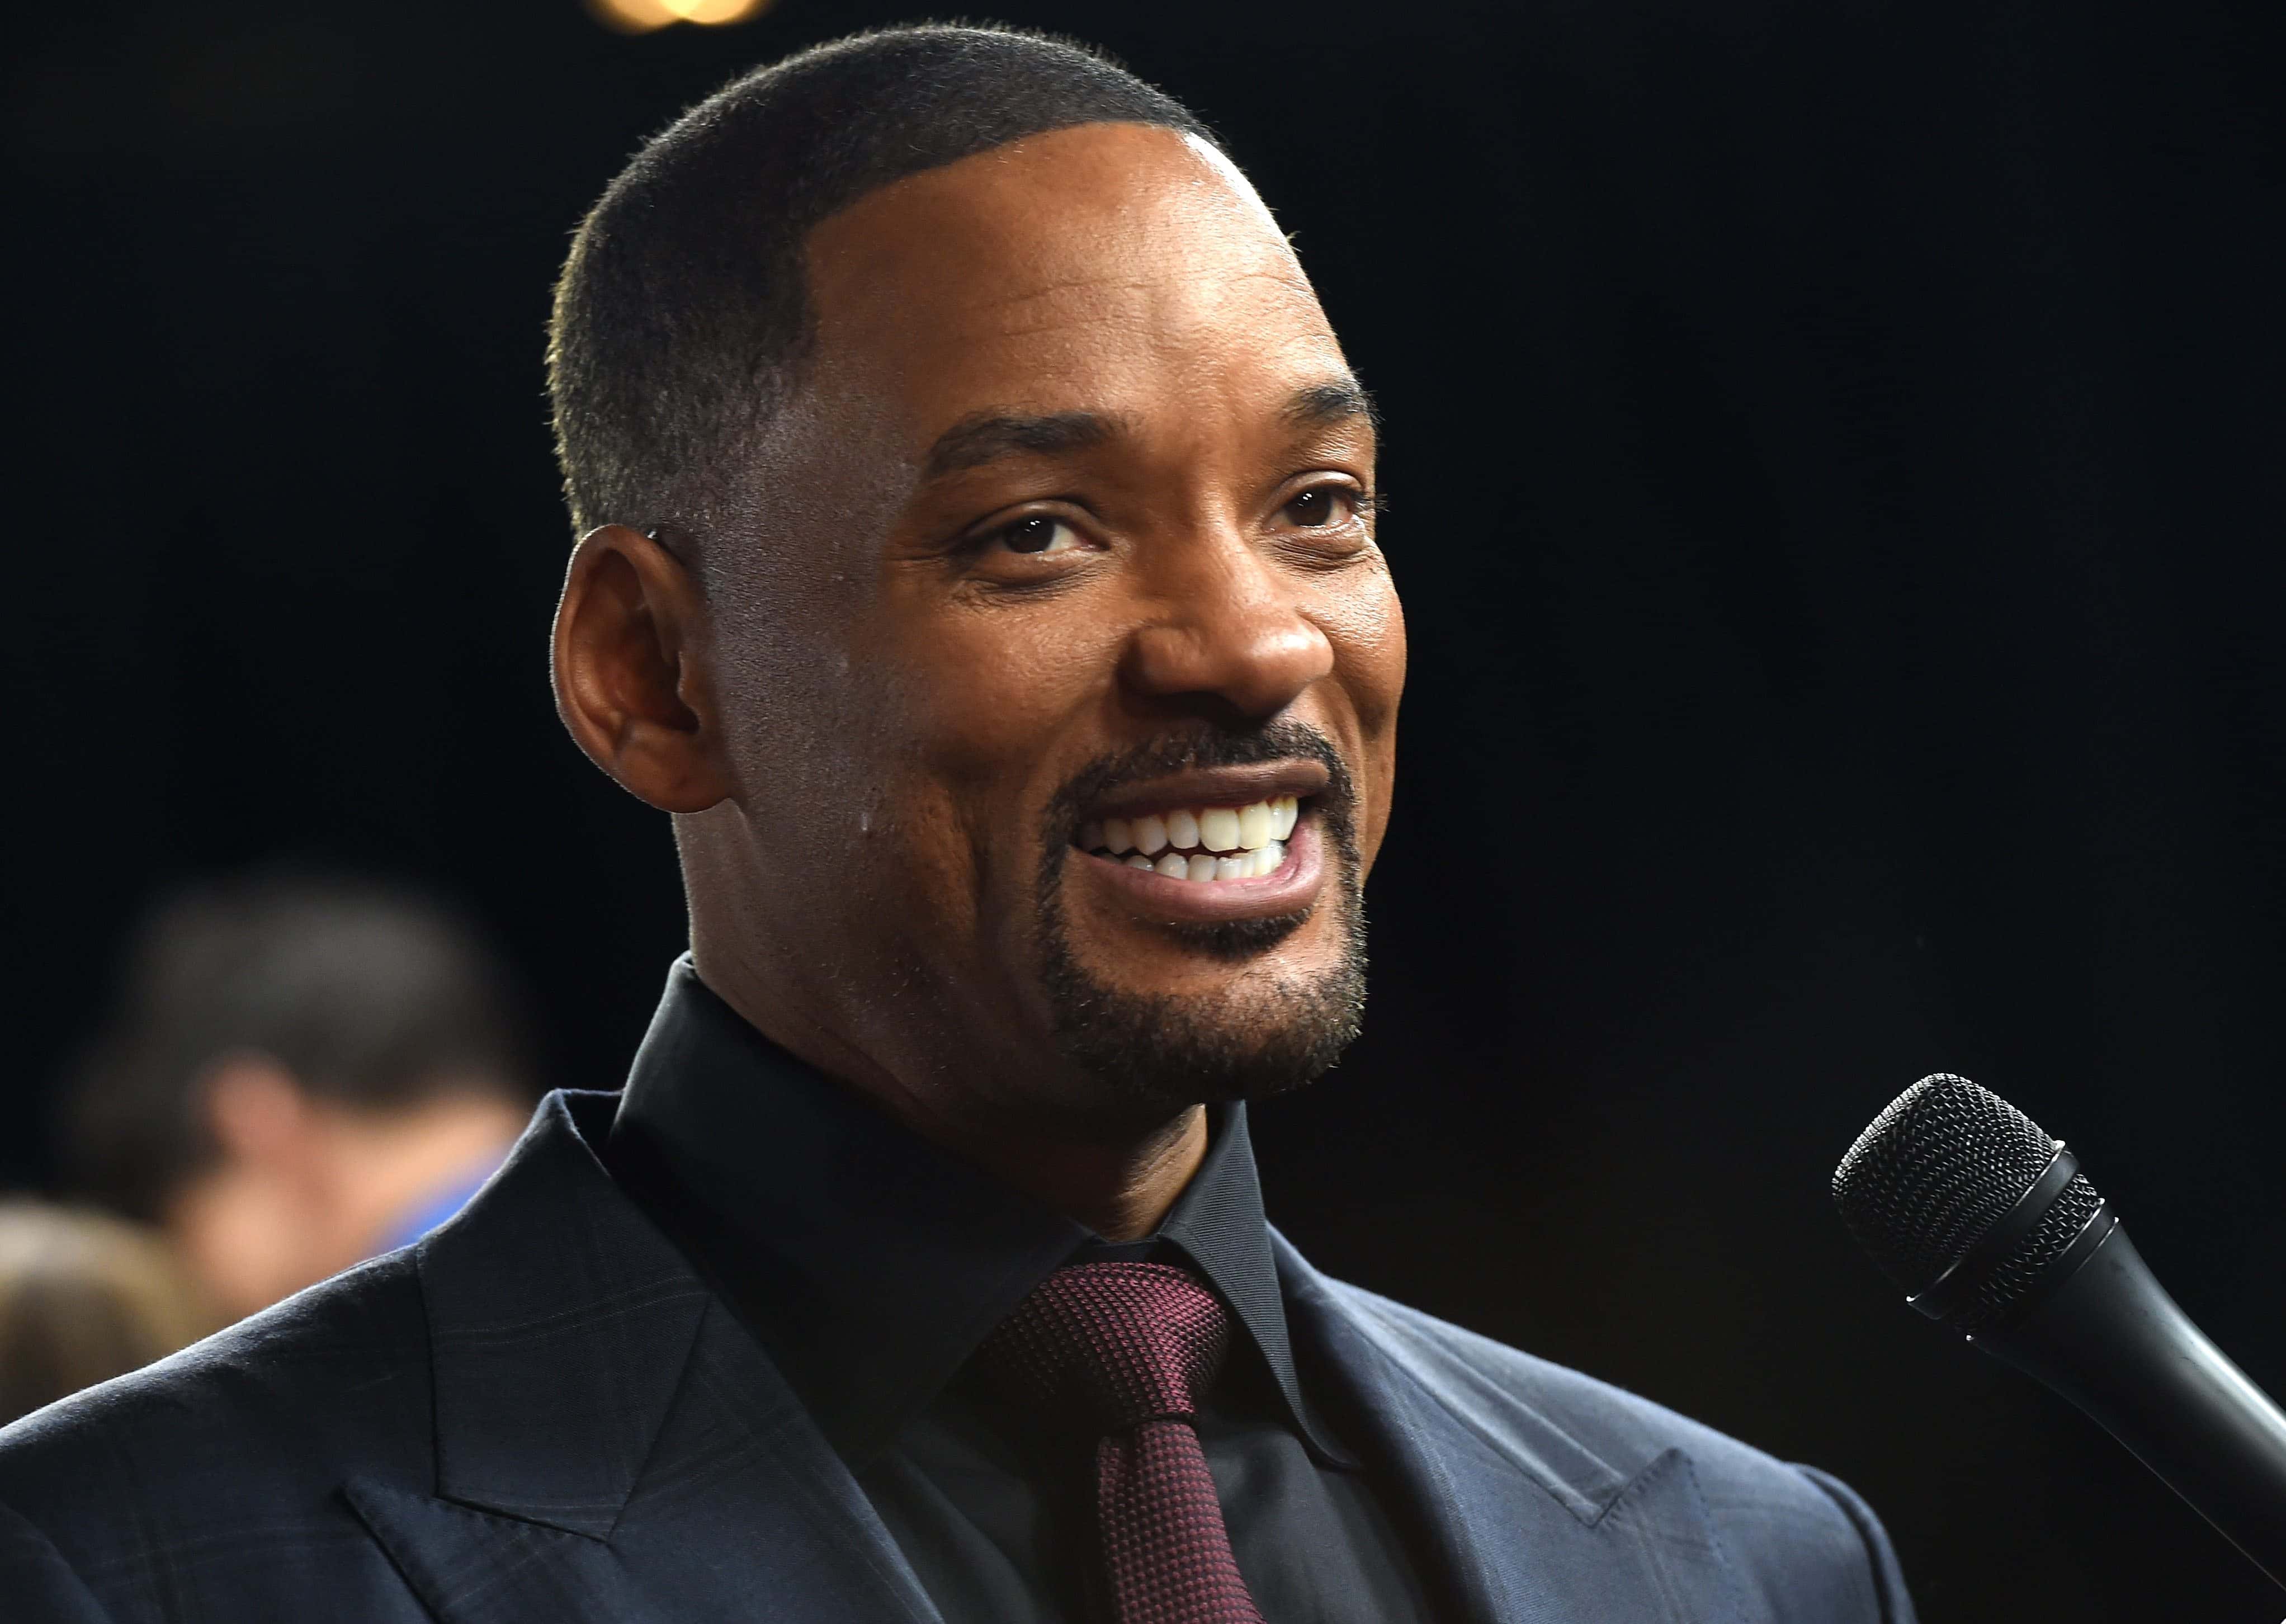 AFI FEST 2015 Presented By Audi Centerpiece Gala Premiere Of Columbia Pictures' 'Concussion' - Red Carpet. Will Smith.